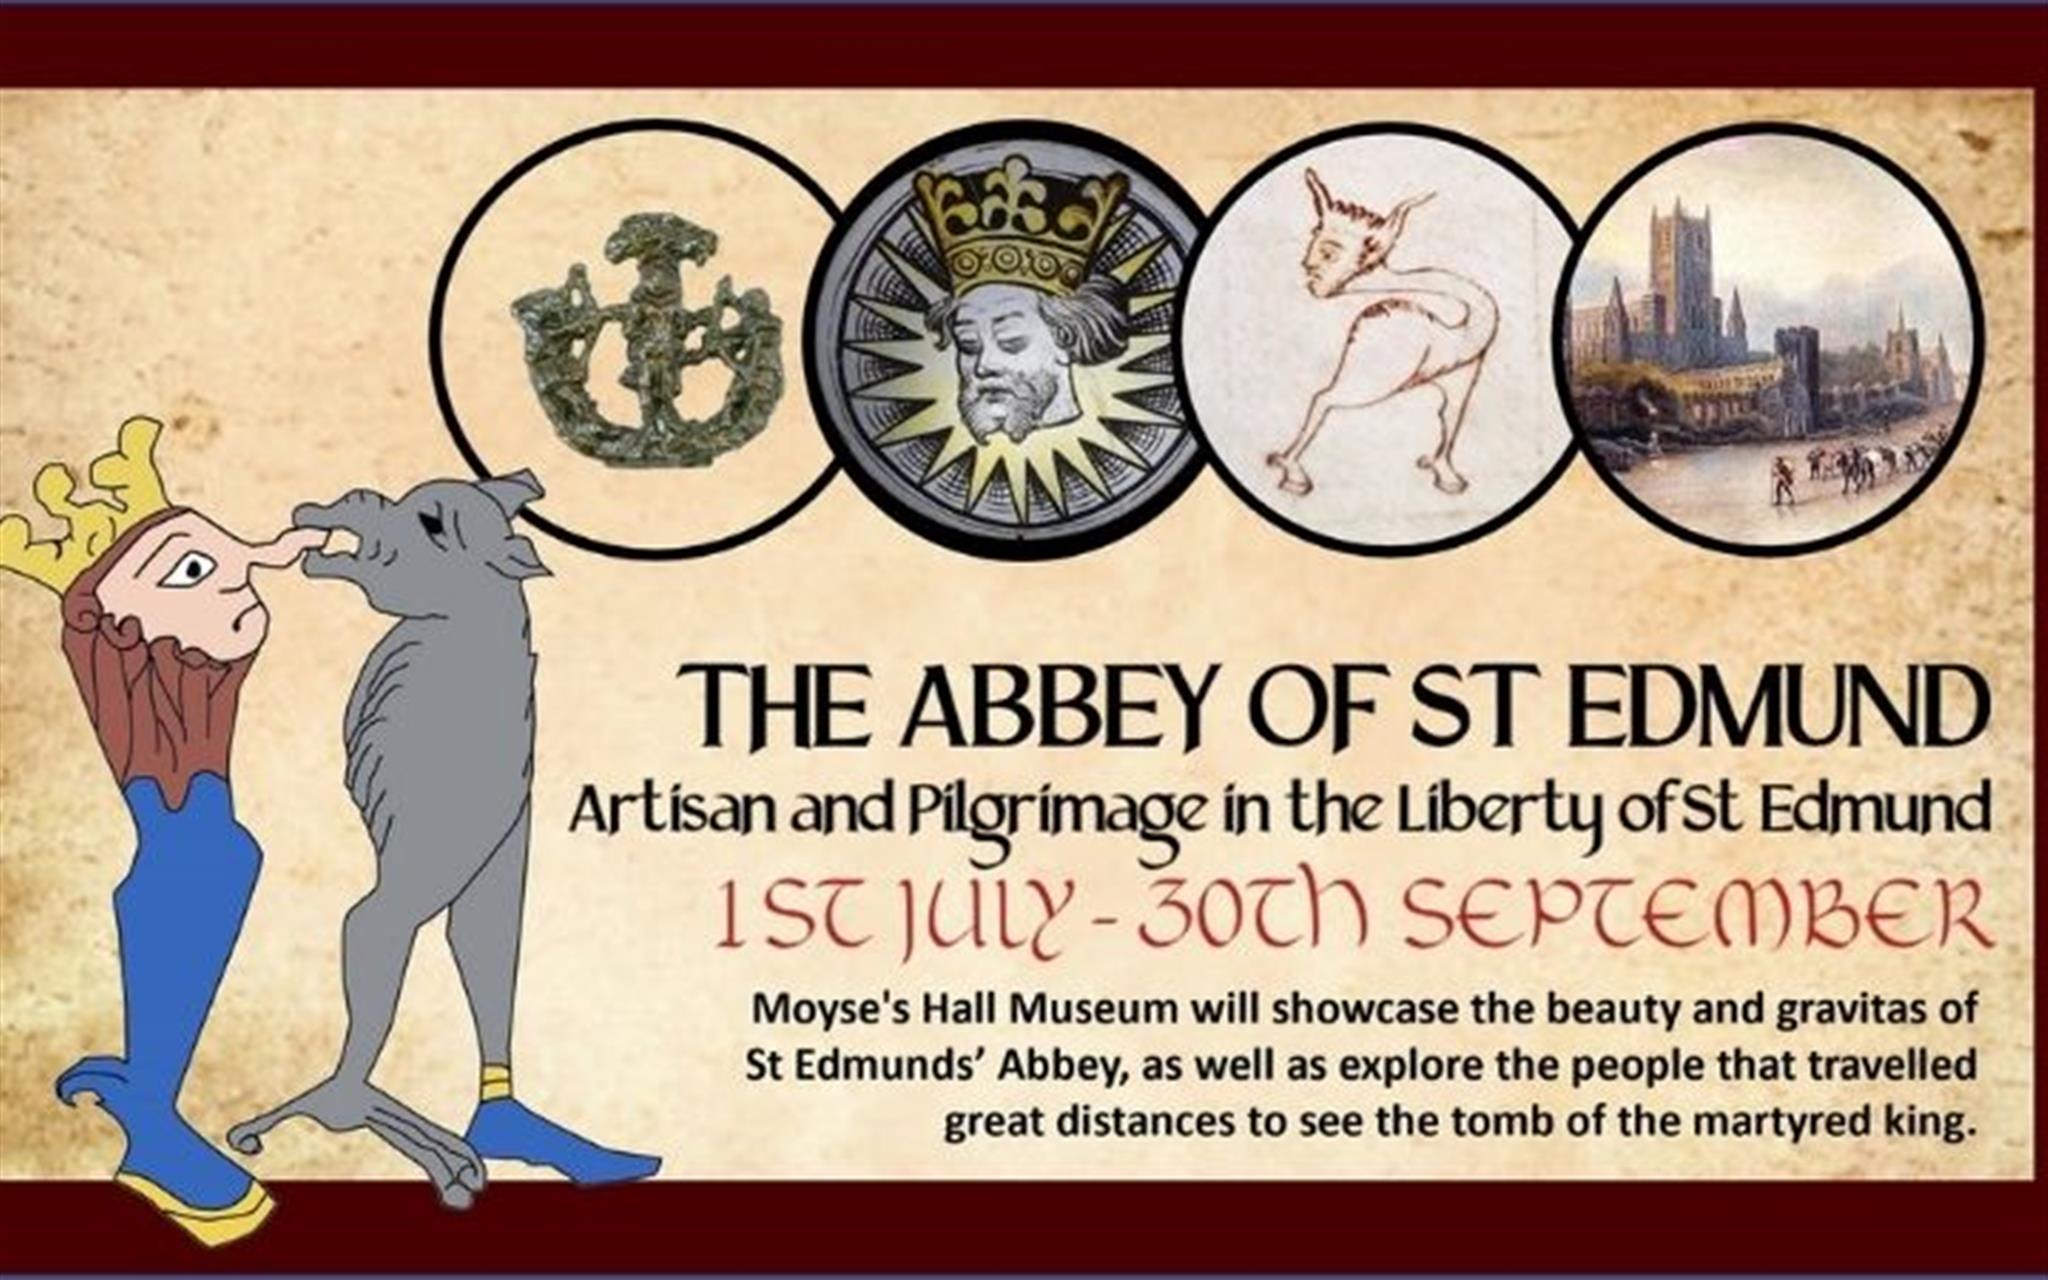 The Abbey of St Edmund: Artisan and Pilgrimage in the Liberty of St Edmund image